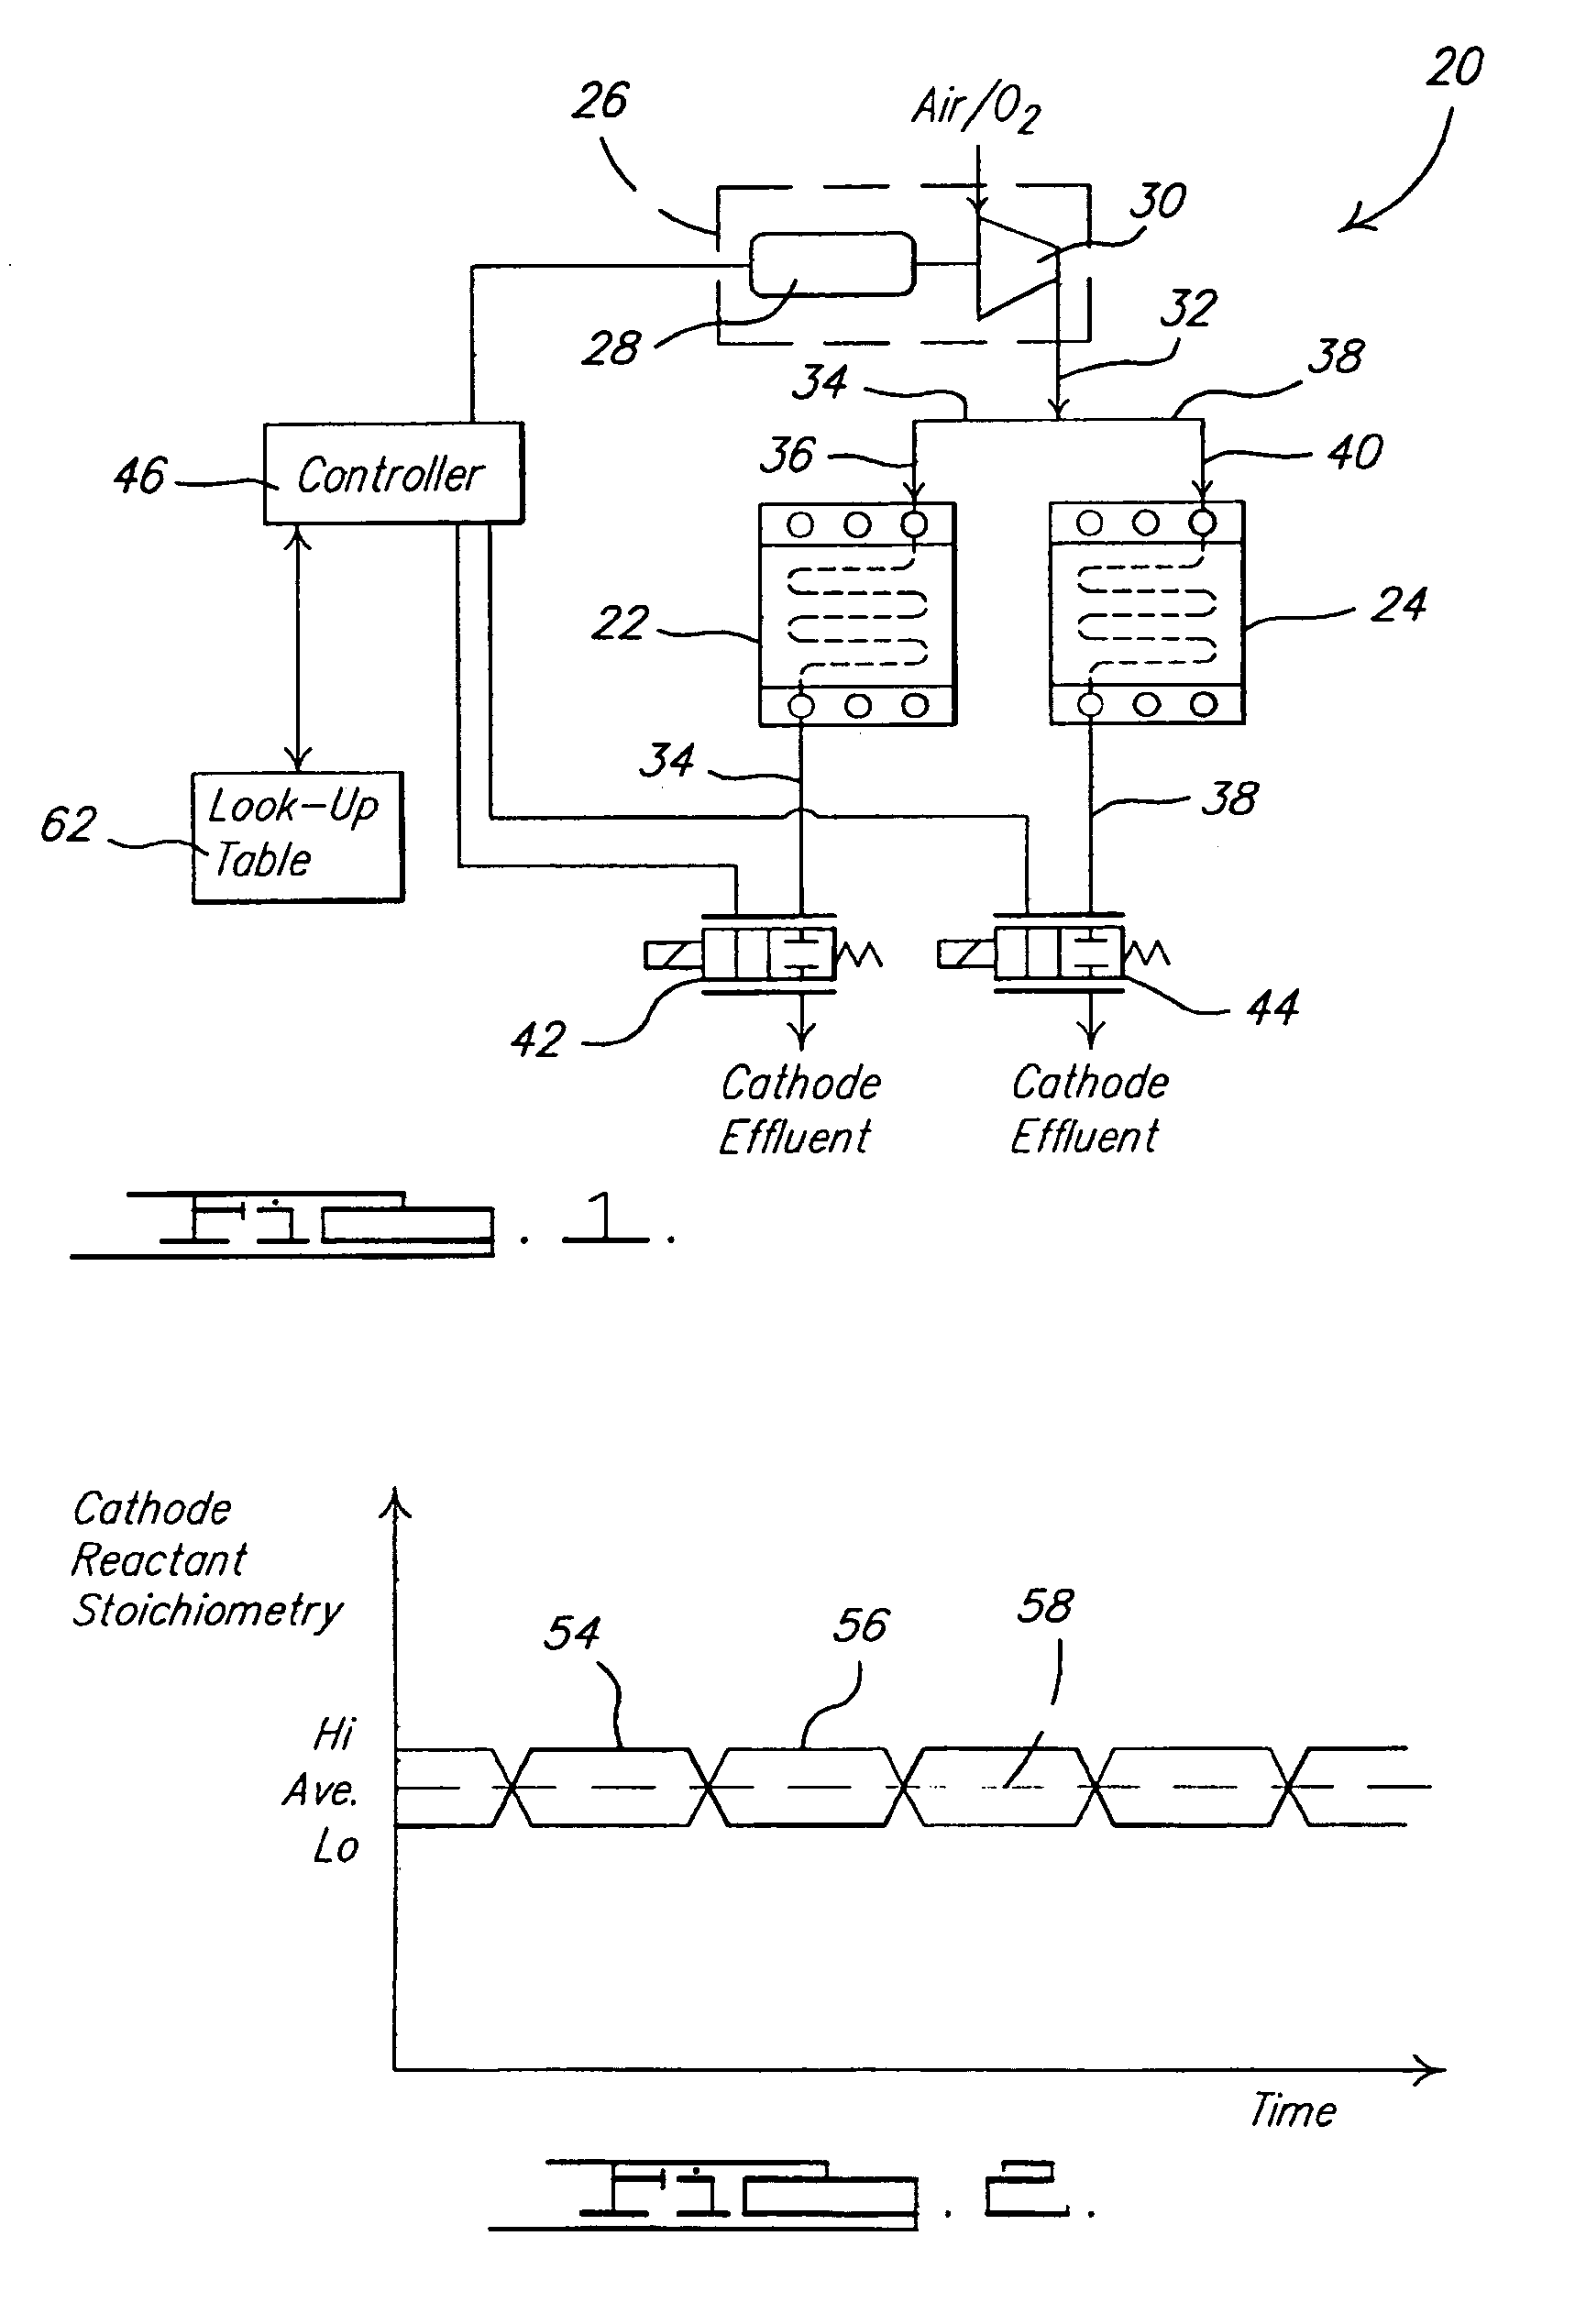 Dynamic cathode gas control for a fuel cell system